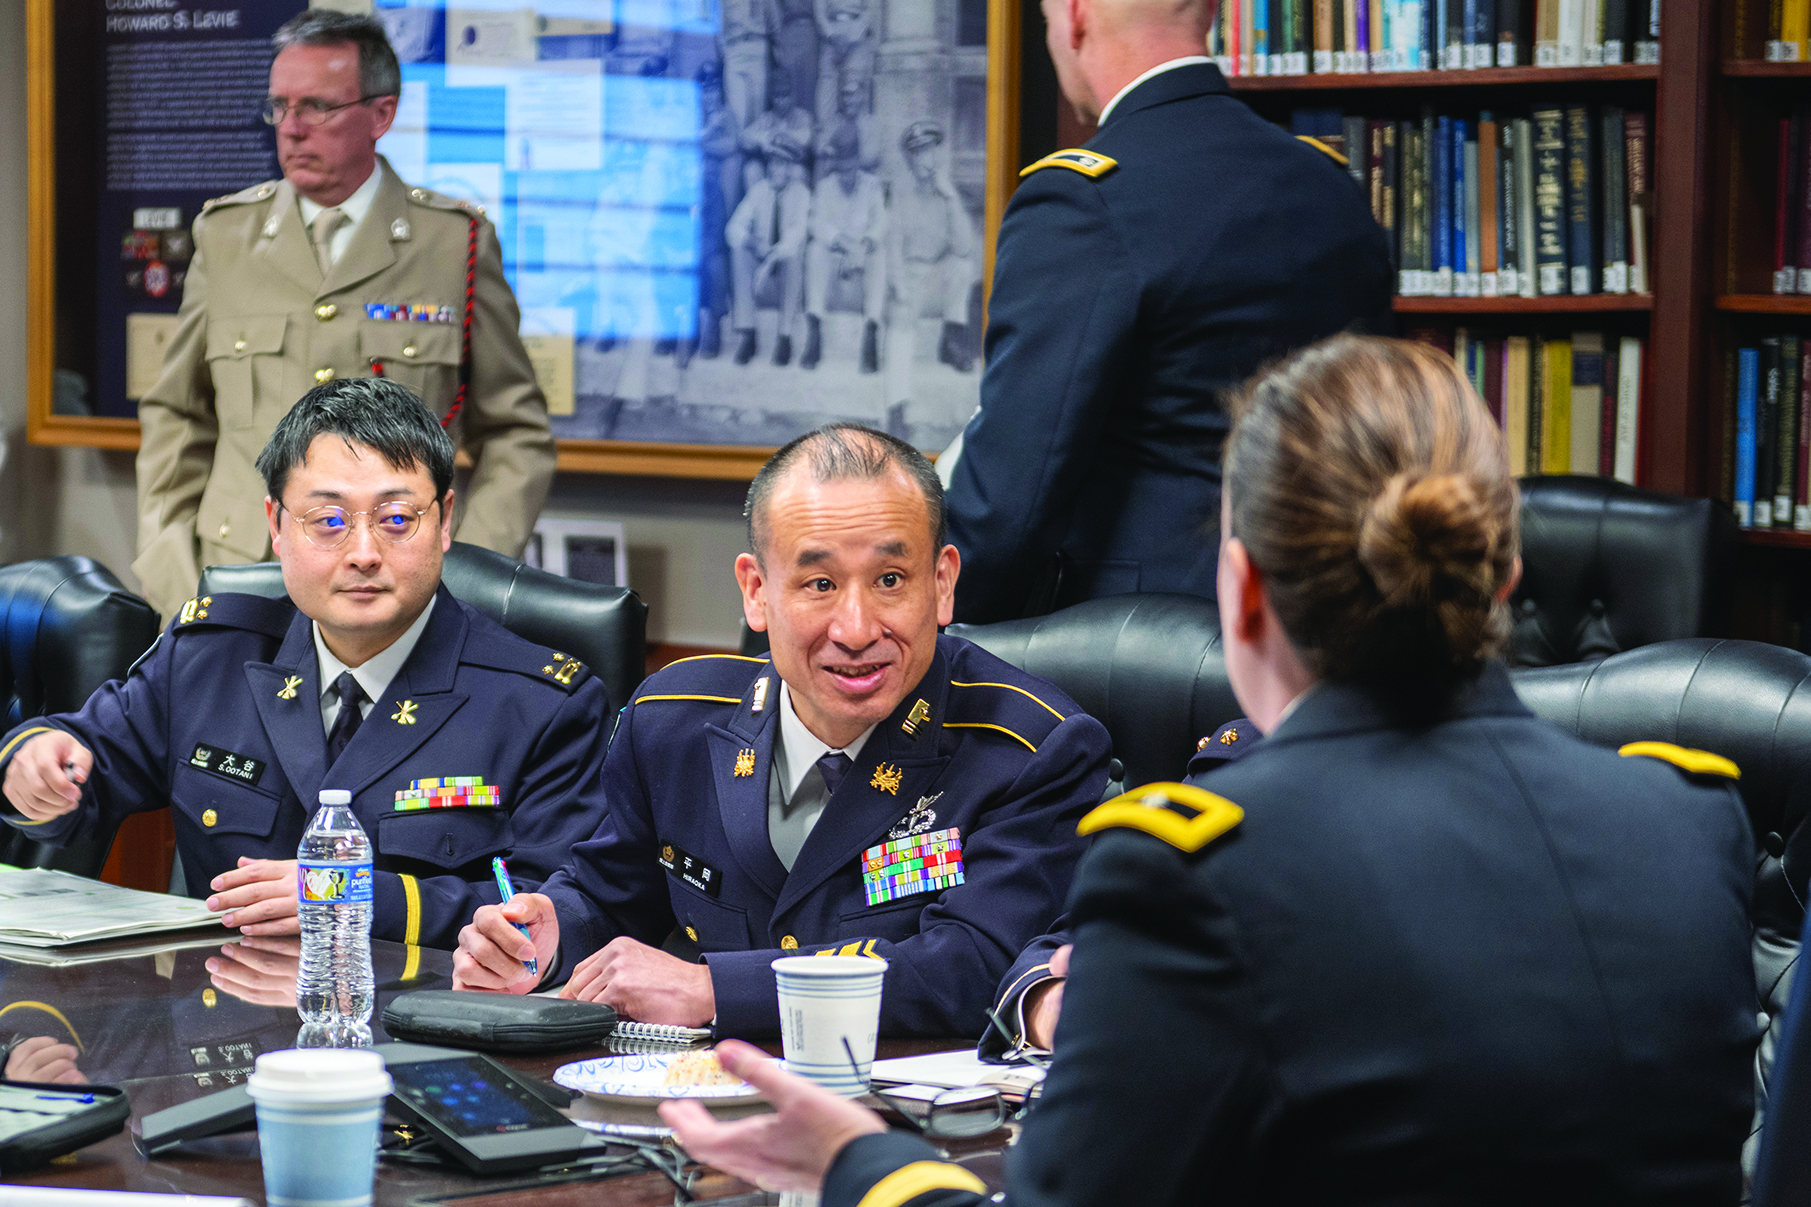 BG Alison C. Martin (right) meets with members of the Japanese delegation during their visit to The Judge Advocate General’s Legal Center and School in Charlottesville, VA, on 15 February 2024. (Credit: Billie Suttles, TJAGLCS)